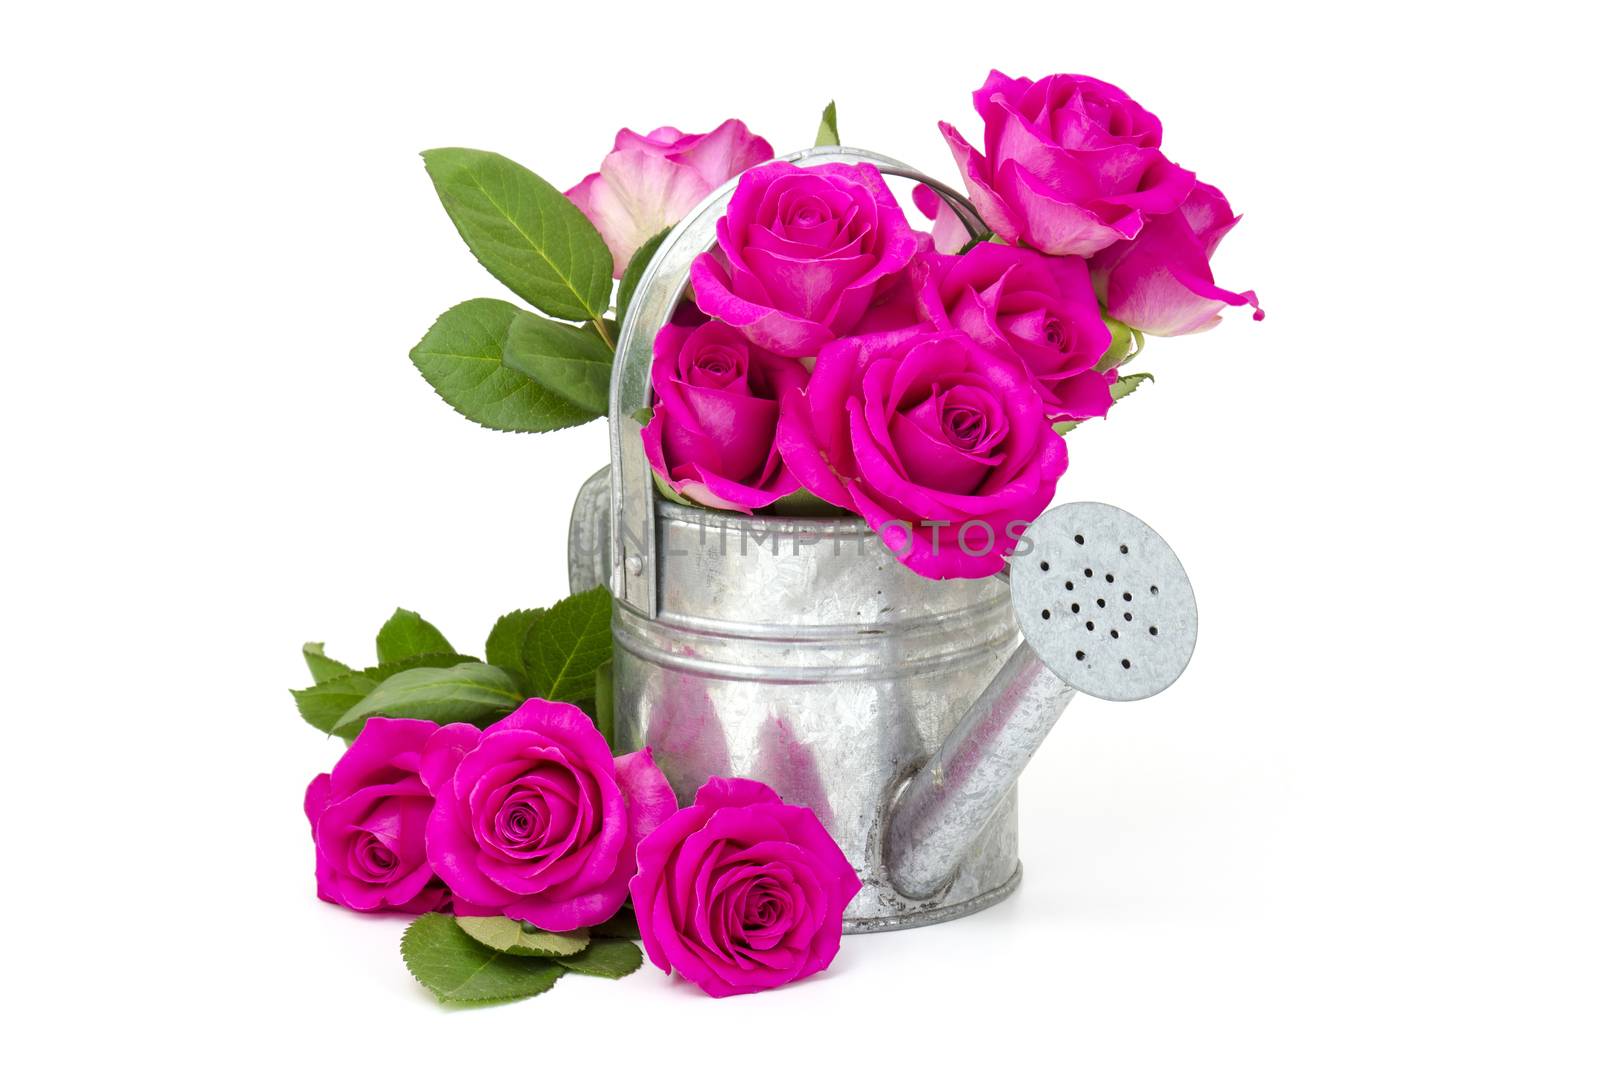 pink roses in a watering can by miradrozdowski